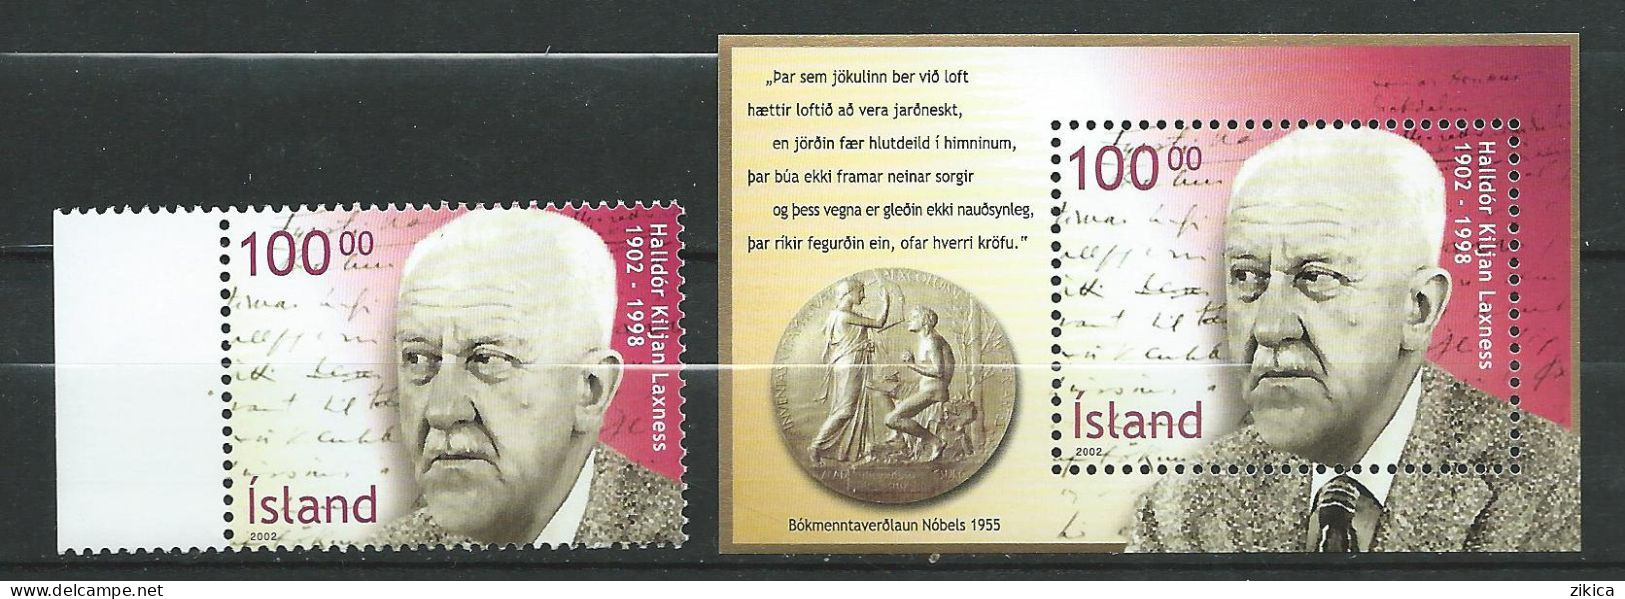 Iceland 2002 The 100th Ann. Of The Birth Of Nobel Prize Winner Halldor Laxness.Block And Stamp. MNH** - Ungebraucht